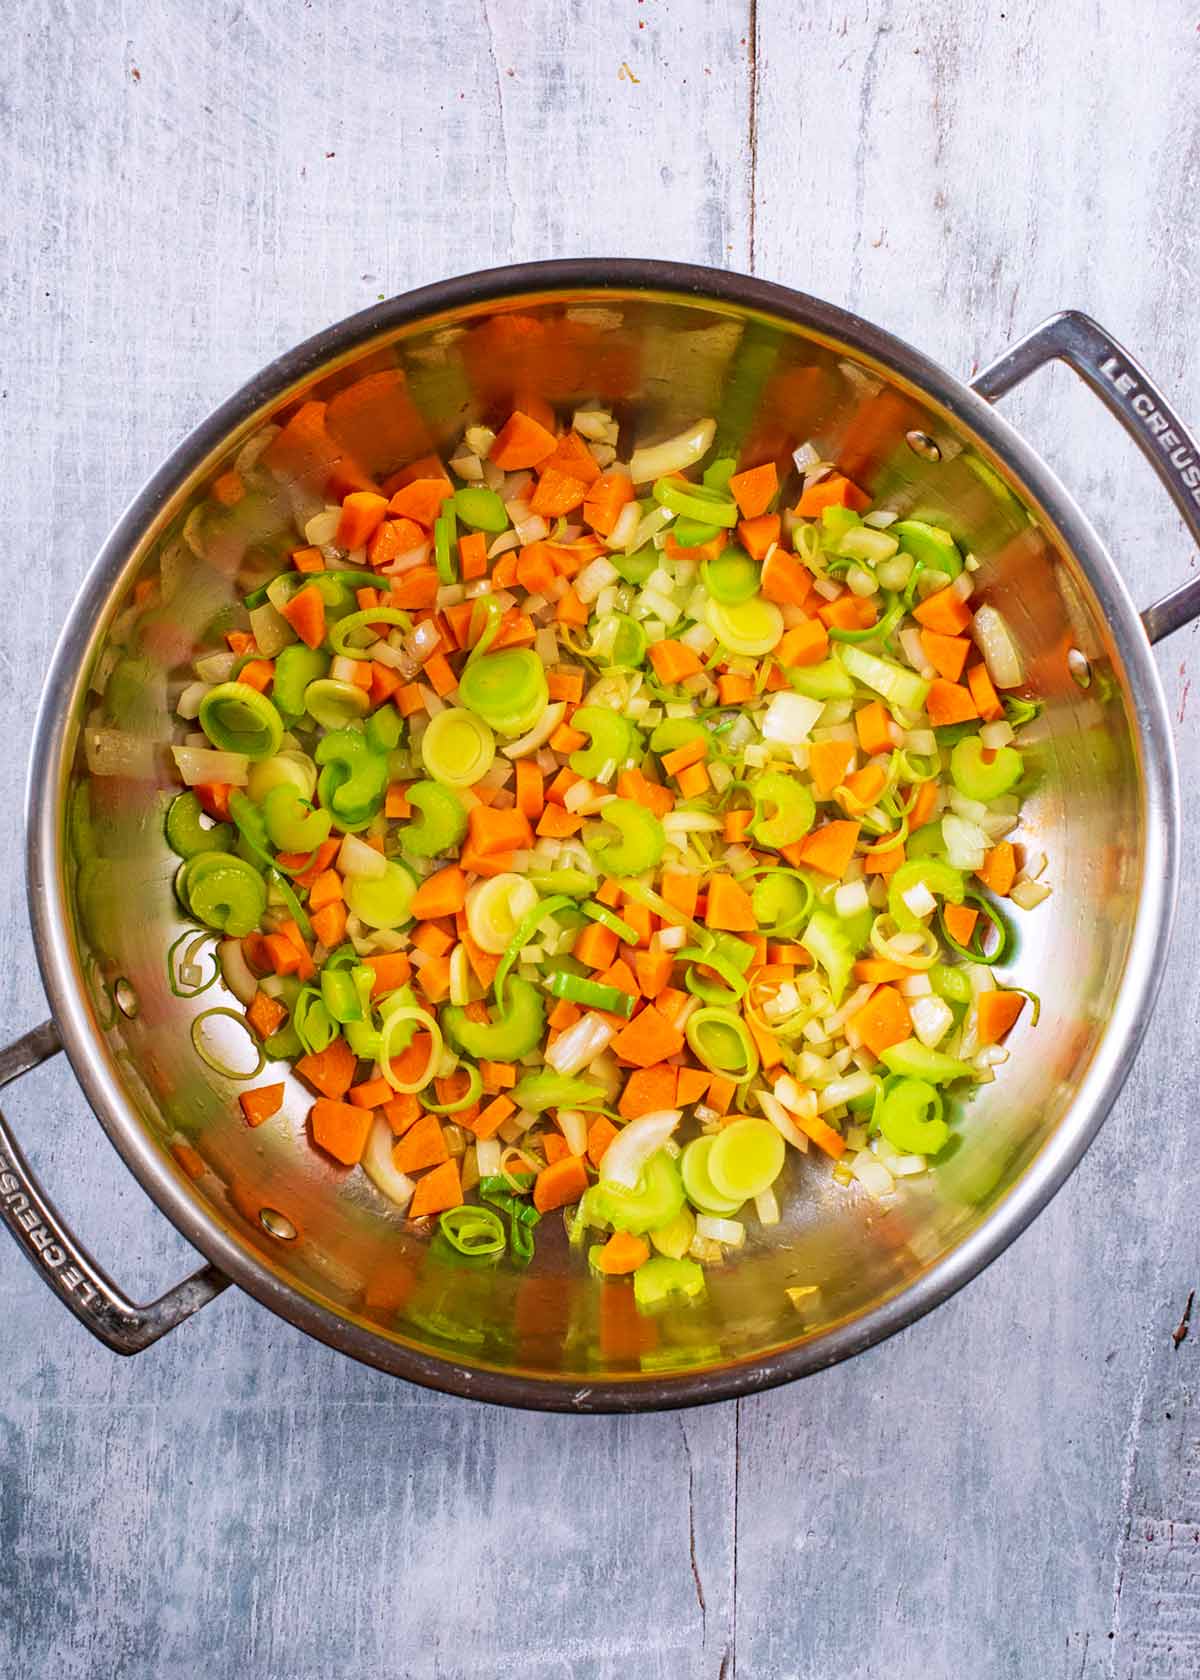 Onions, carrots, celery, garlic and leek in a large silver pan.